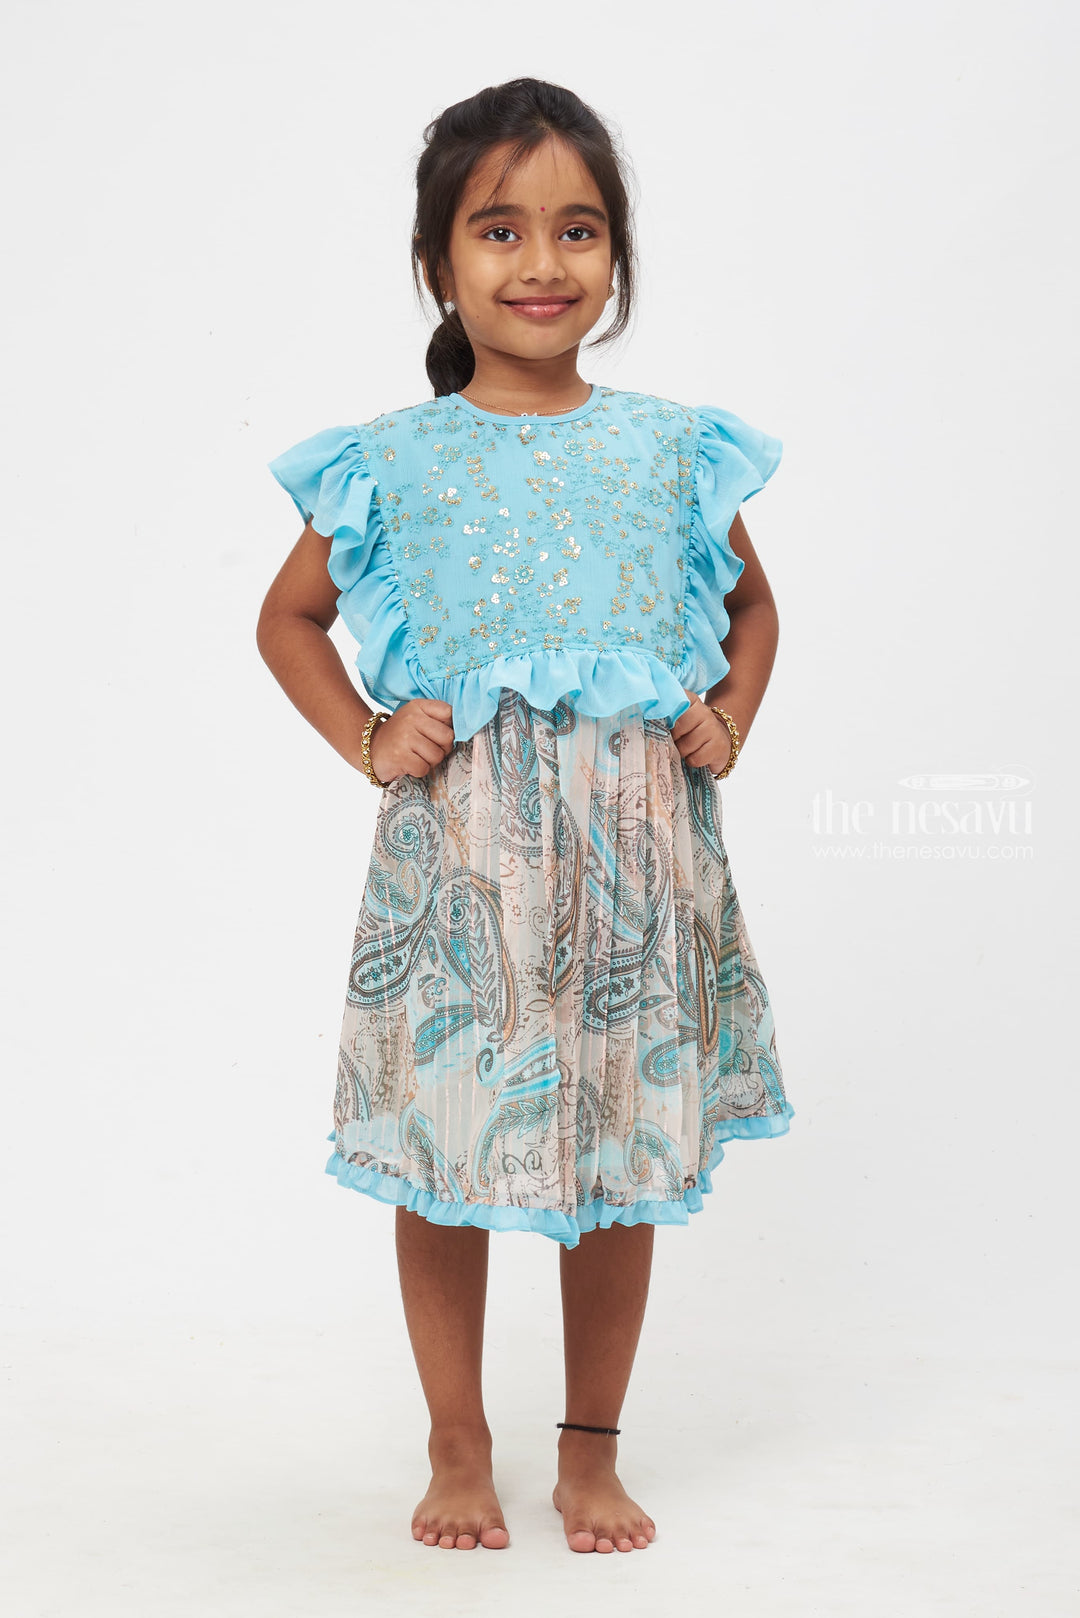 The Nesavu Girls Cotton Frock Elegant Paisley Patterned Turquoise Frock for Girls Nesavu 22 (4Y) / Turquoise / Georgette GFC1164A-22 Exquisite Paisley-Printed Turquoise Frock | Tradition Meets Modernity | The Nesavu